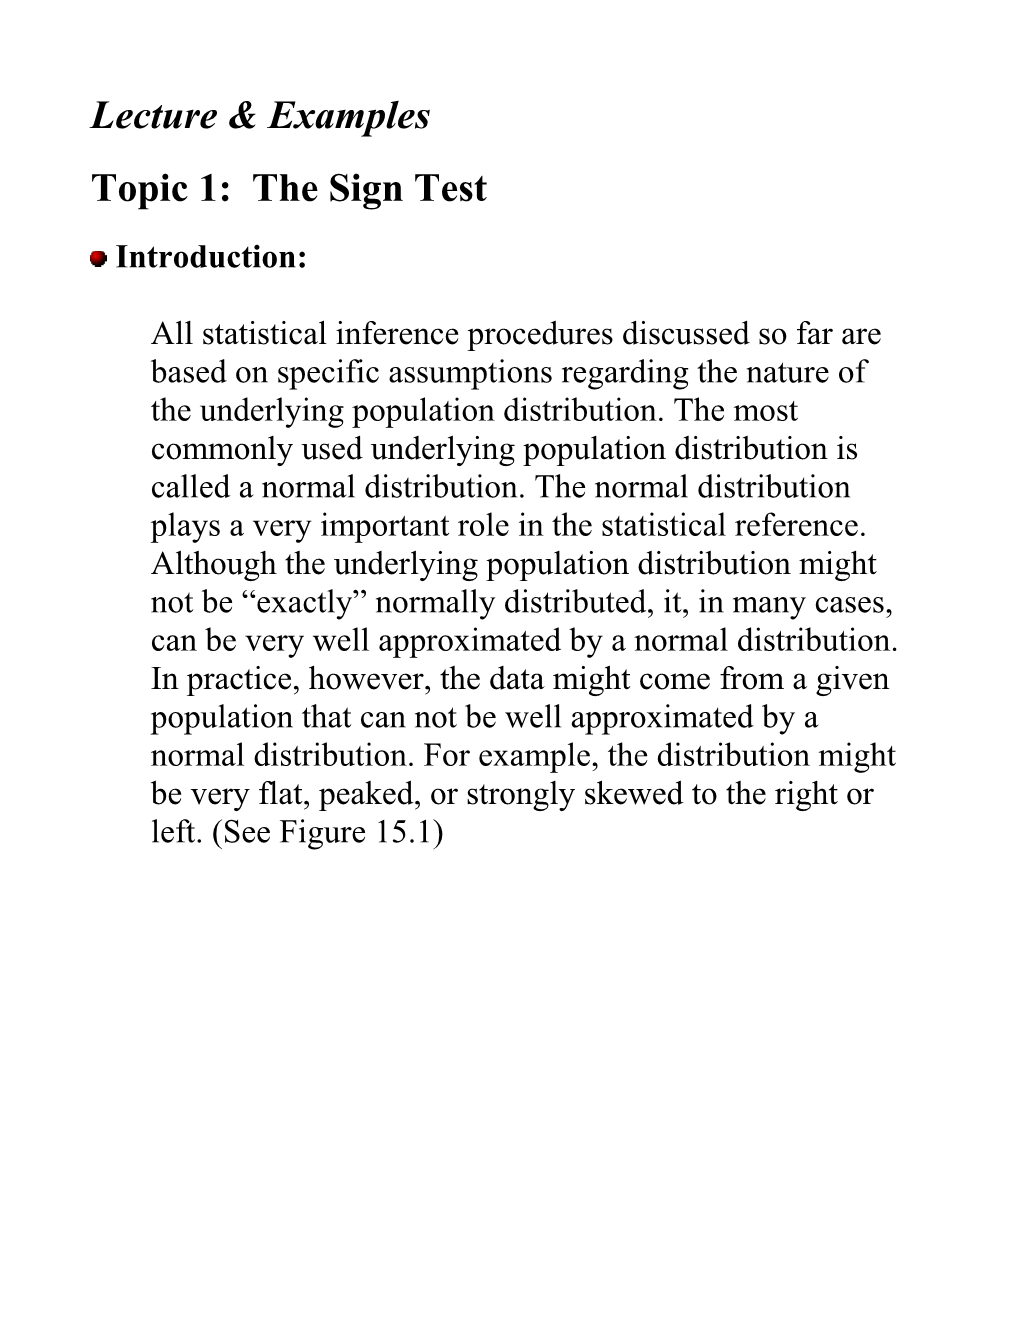 Topic 1: the Sign Test